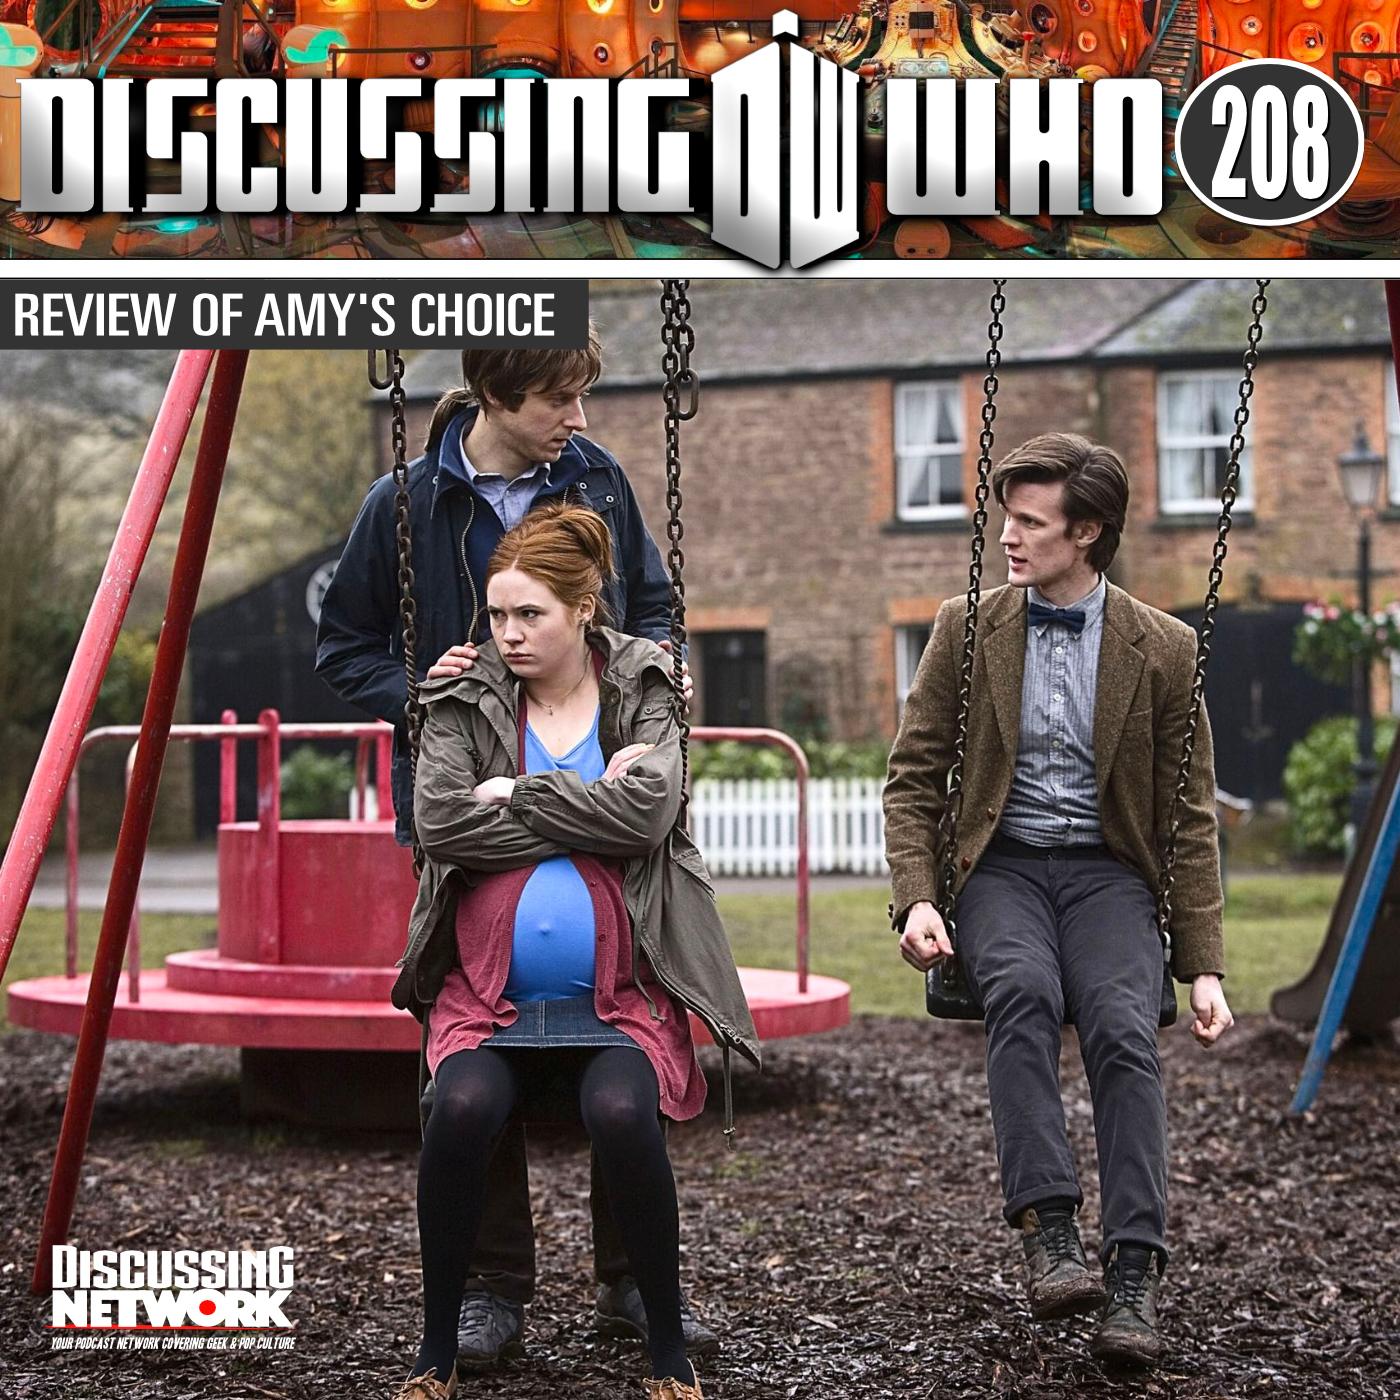 Review of Amy's Choice, Doctor Who Series 5 Episode 7